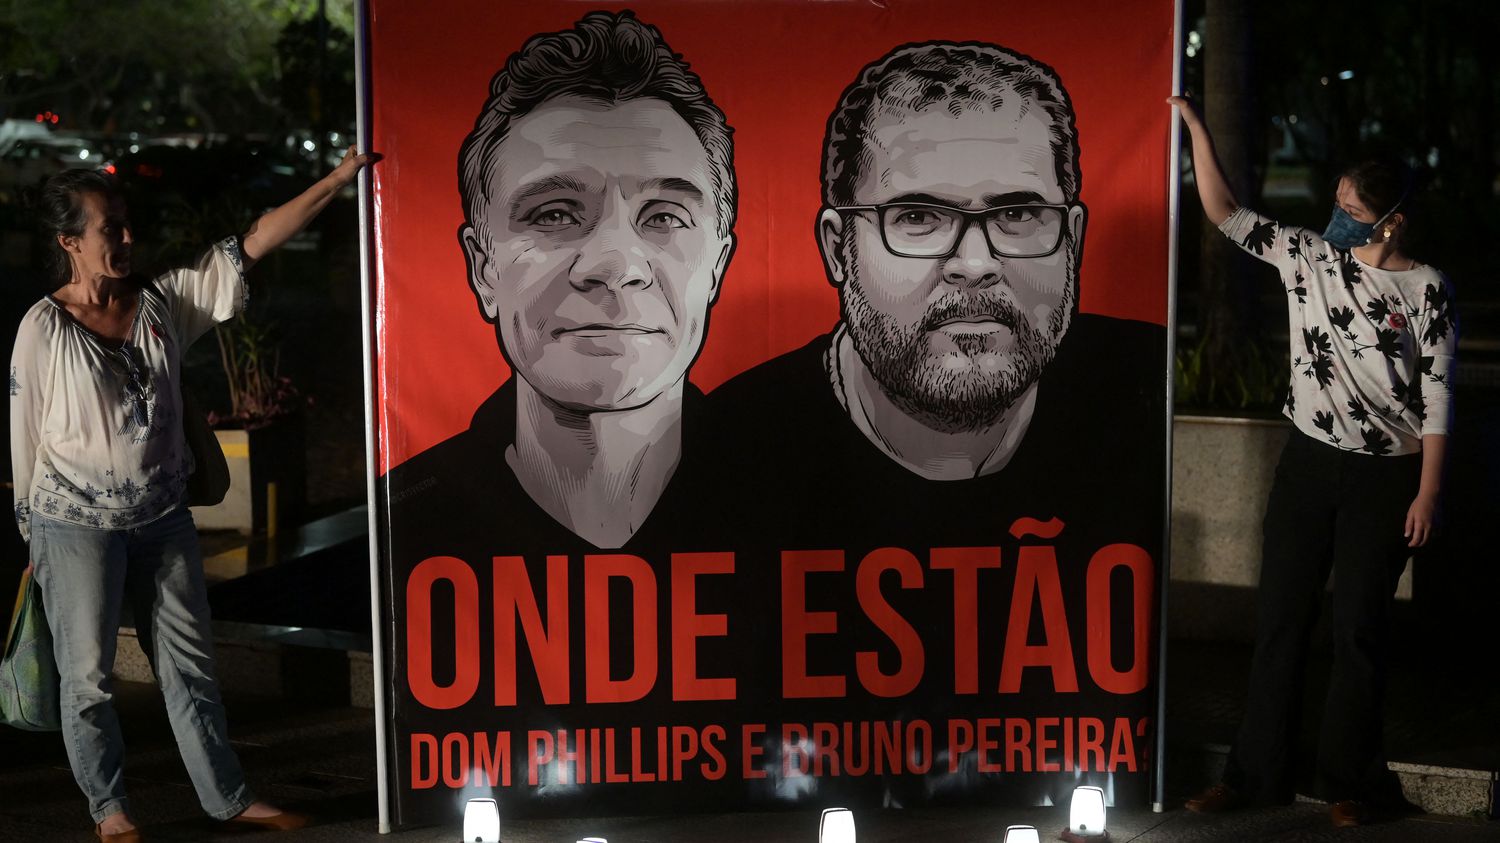 Brazil: what we know about the disappearance in the Amazon of journalist Dom Philips and expert Bruno Pereira
